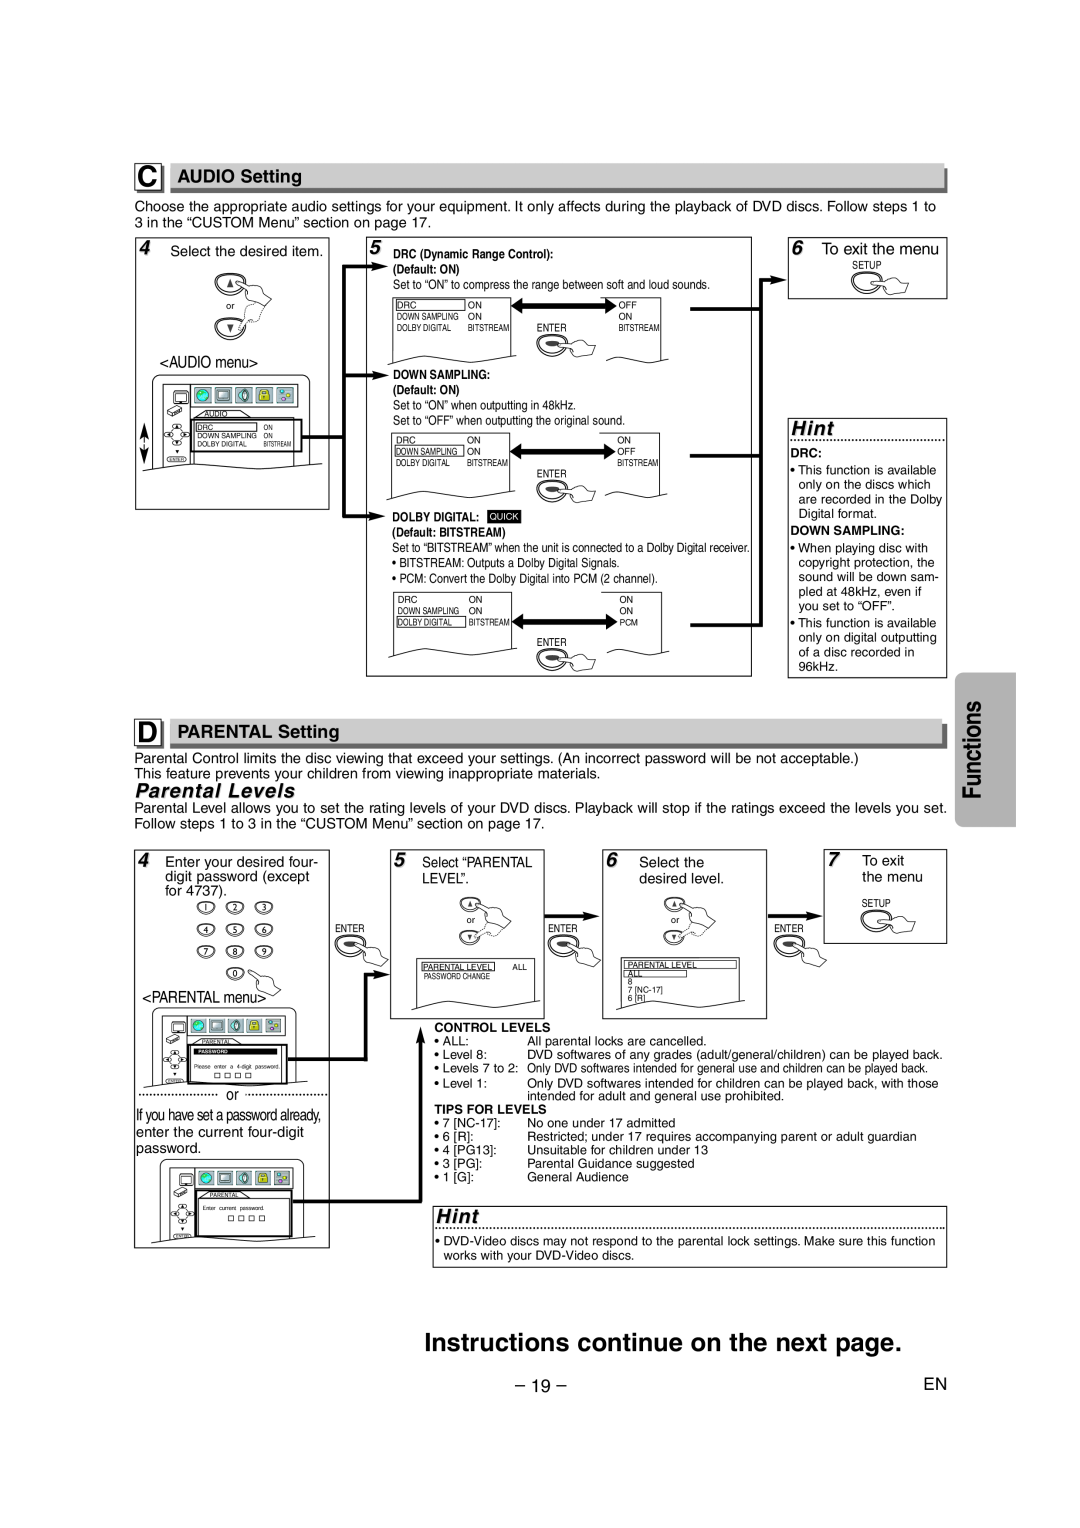 FUNAI MSD1005 owner manual Instructions continue on the next page, Functions, C AUDIO Setting, D PARENTAL Setting 